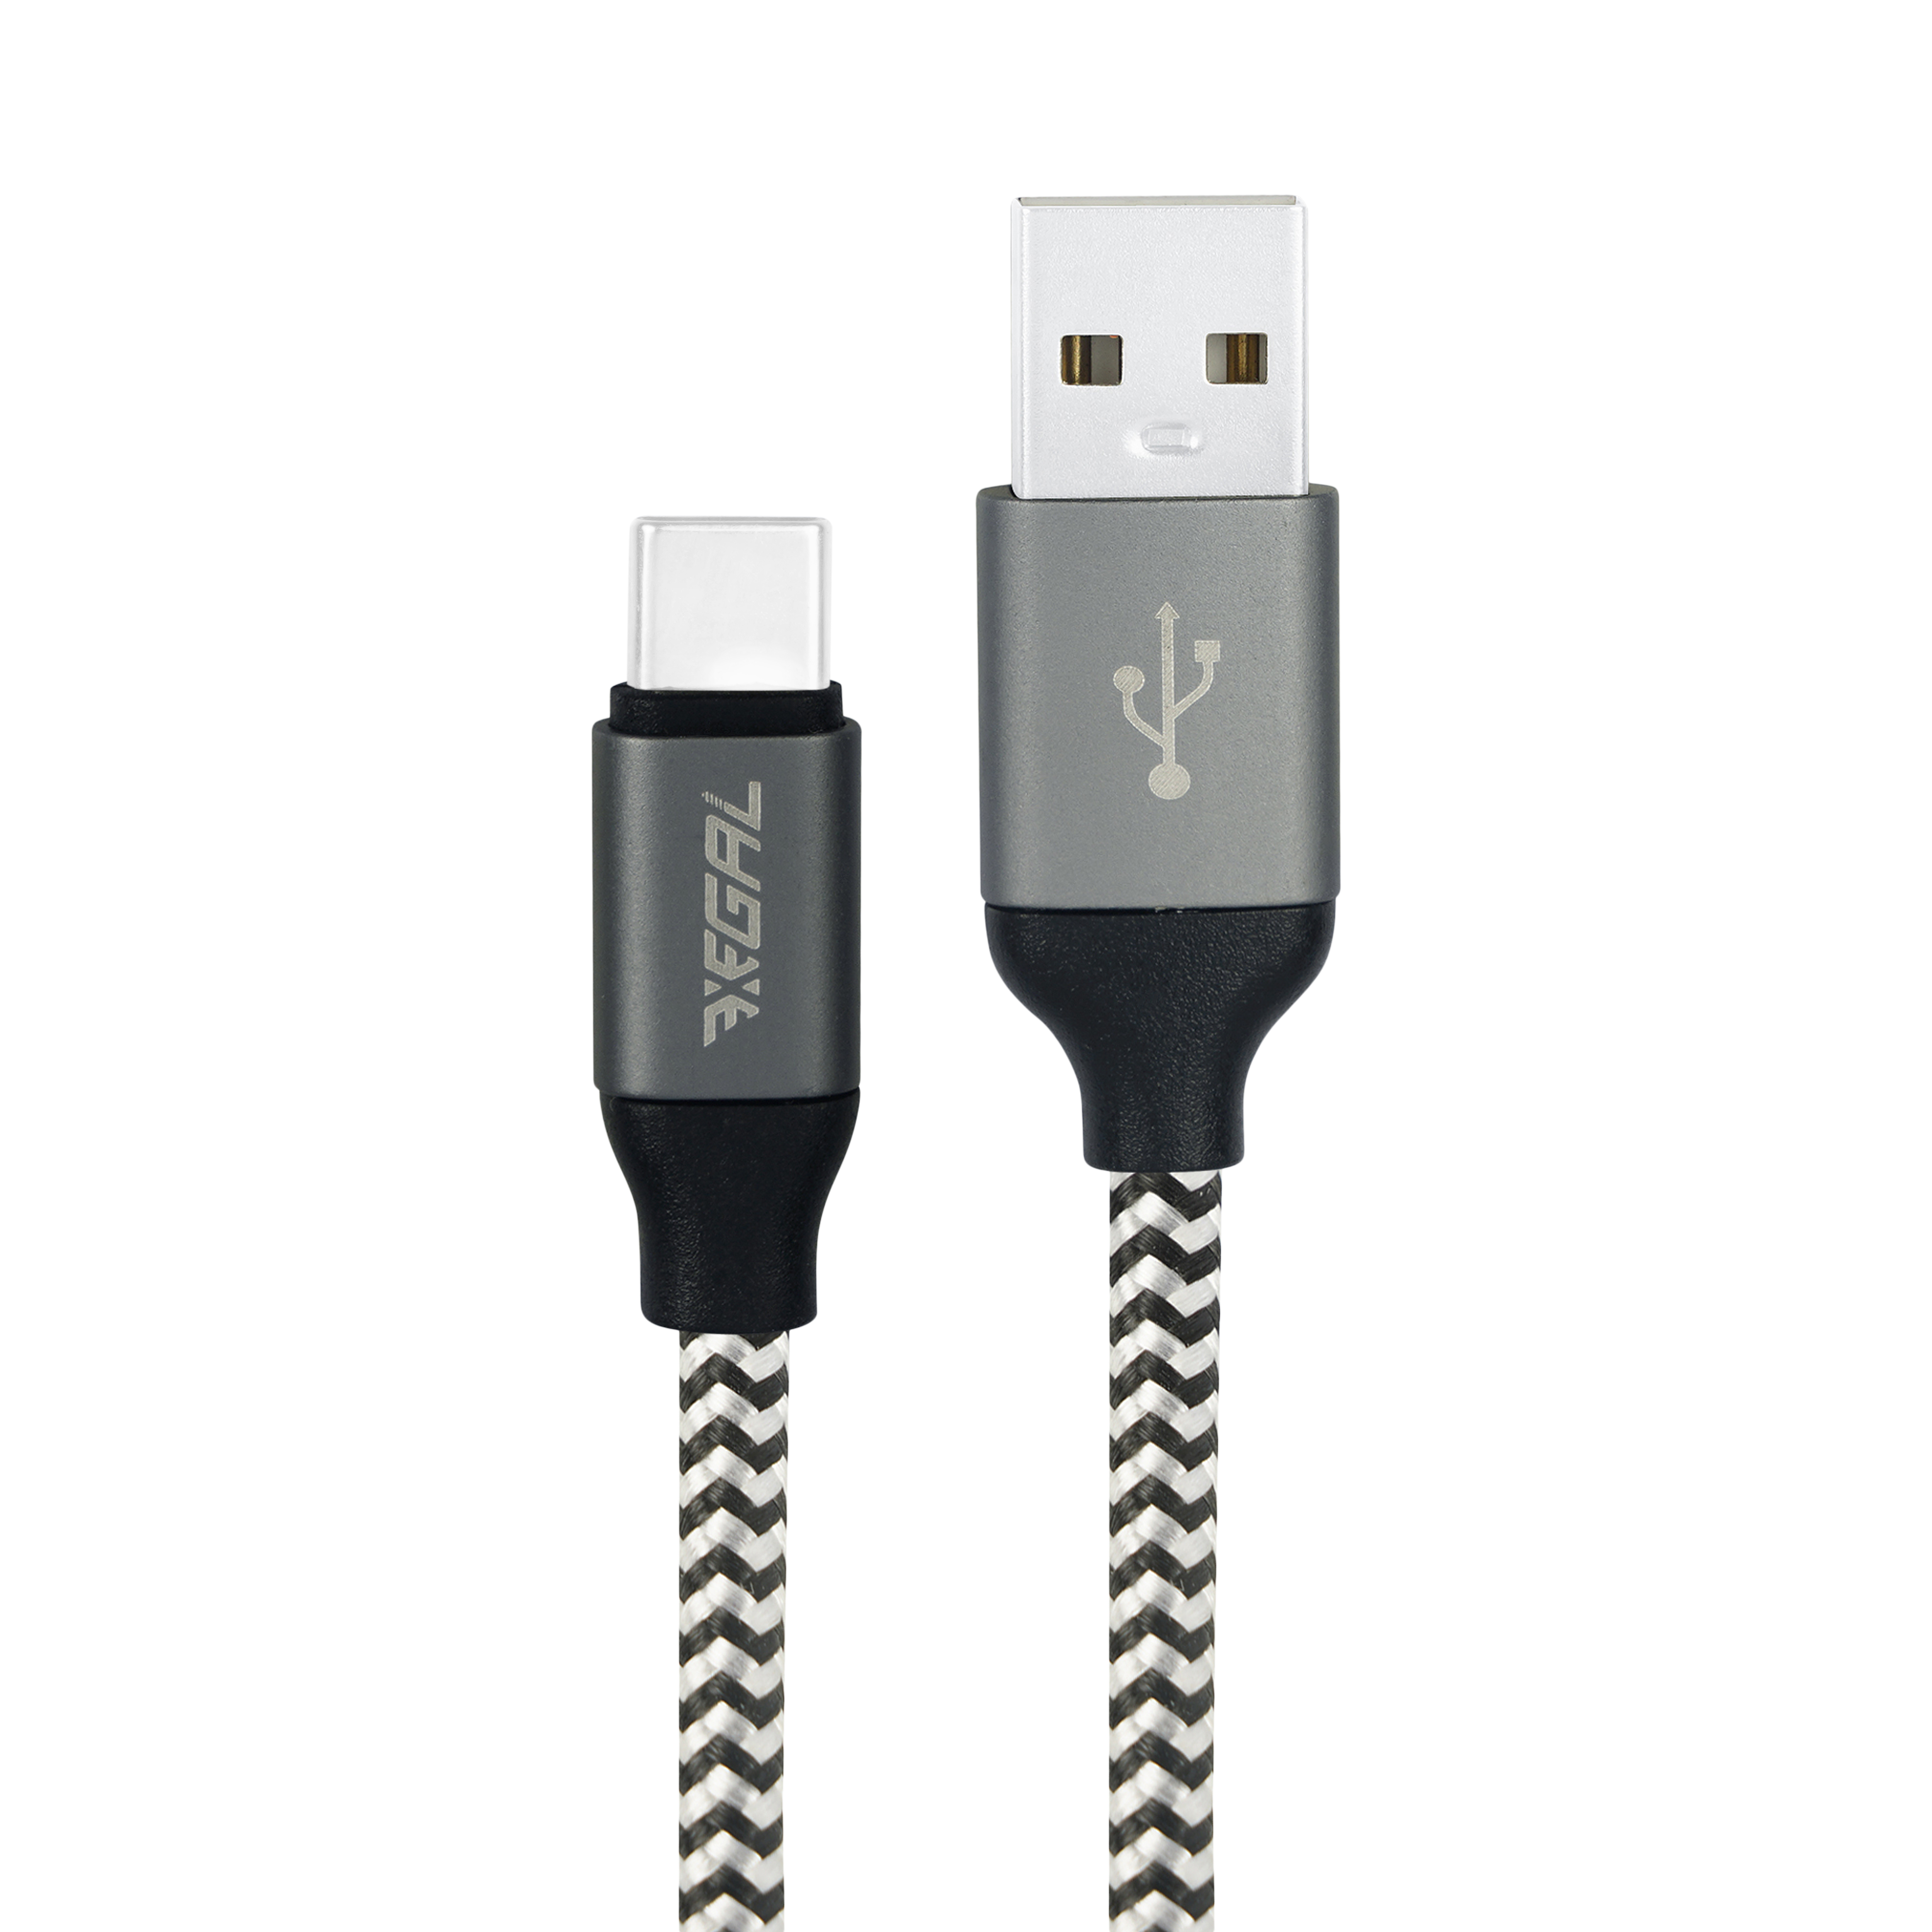 Xegal 6.5ft Type C USB Cable  Compatible with All Phones With Type C port, Grey Black, Sync and Charge Cable 